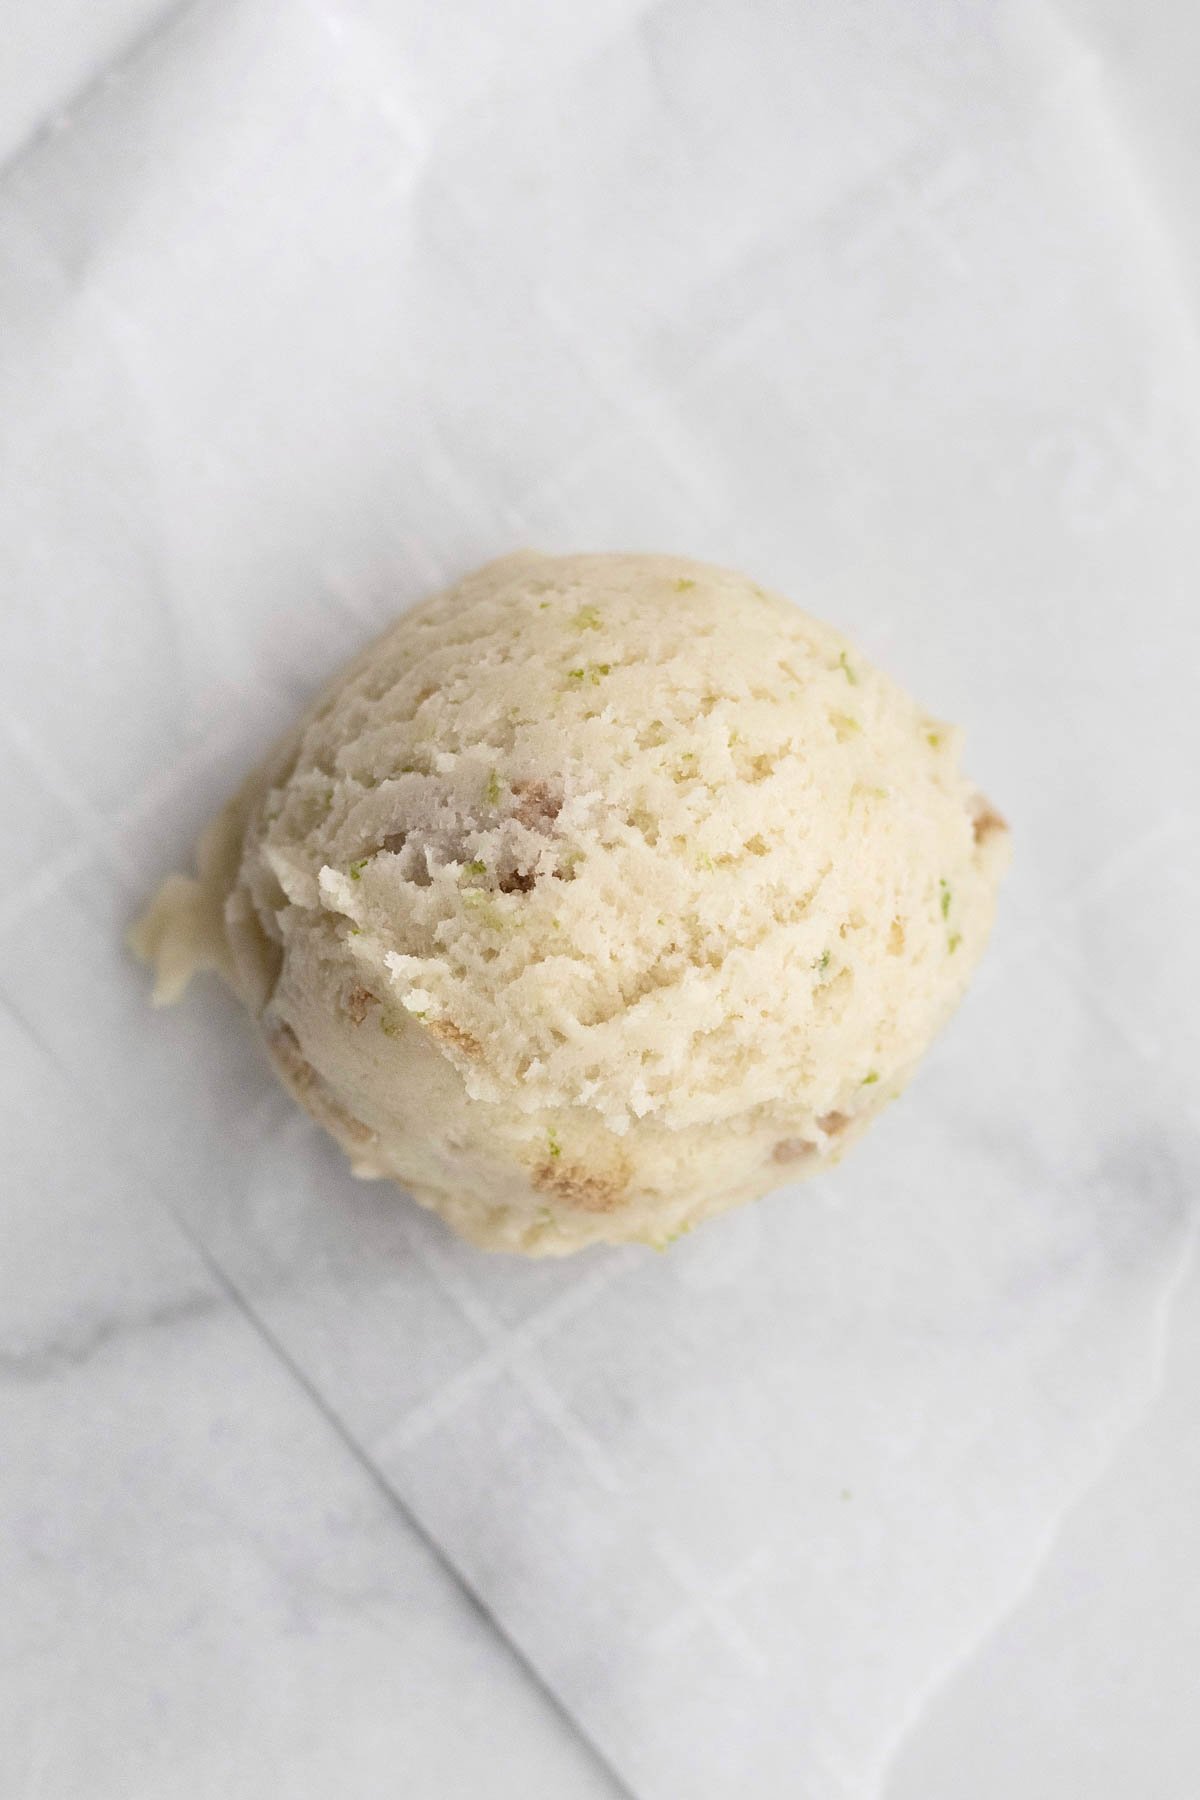 A scooped ball of key lime cookie dough.